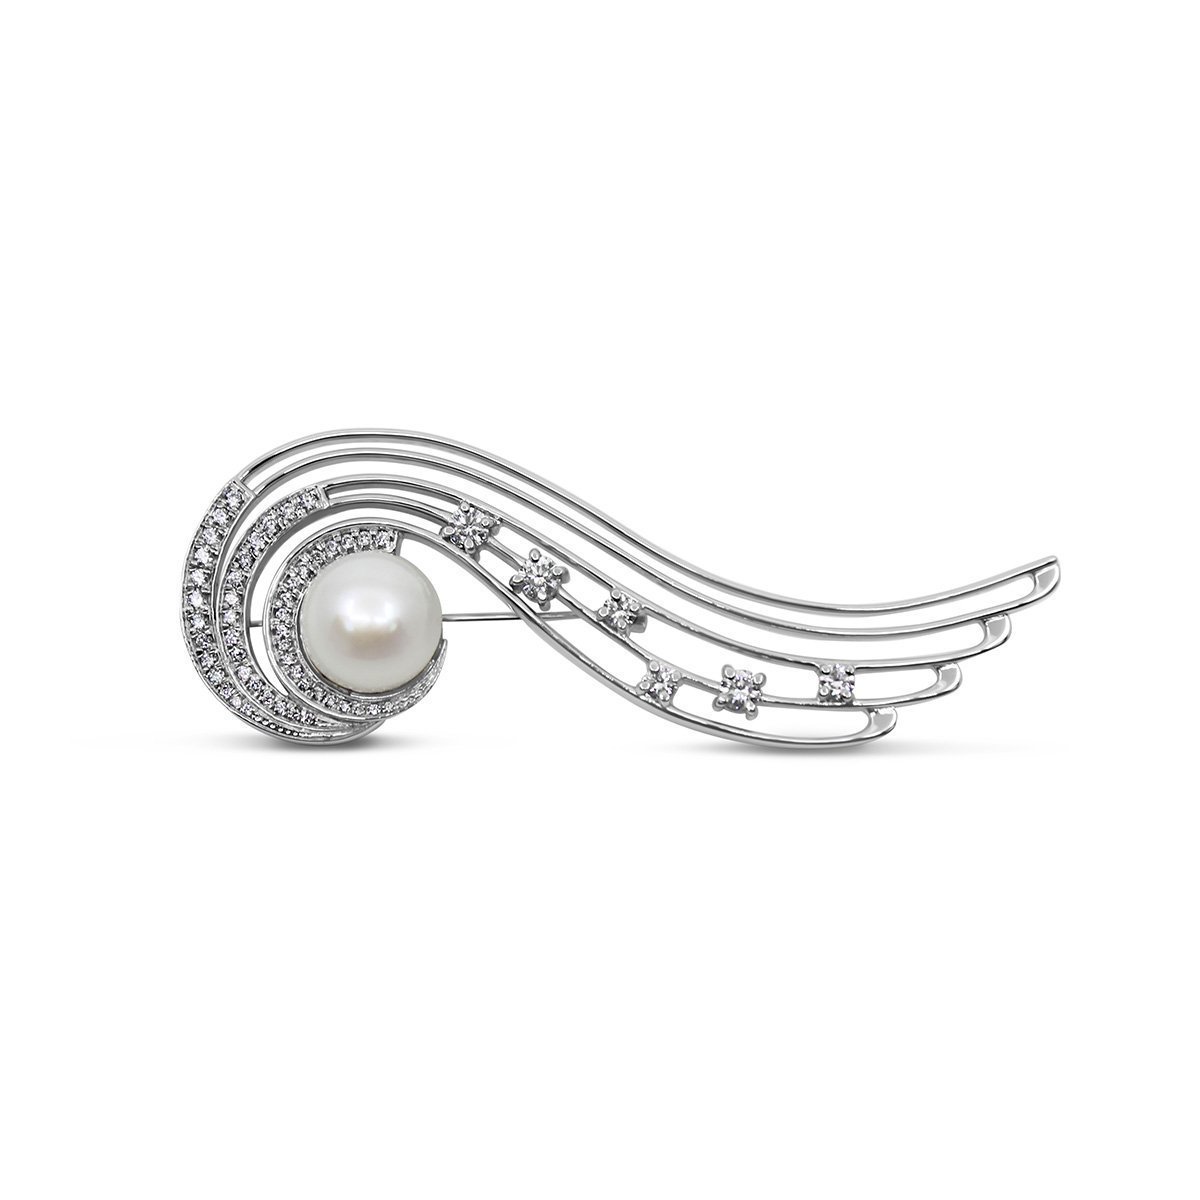 A diamond and pearl brooch made by DMR to celebrate the Platinum Jubilee